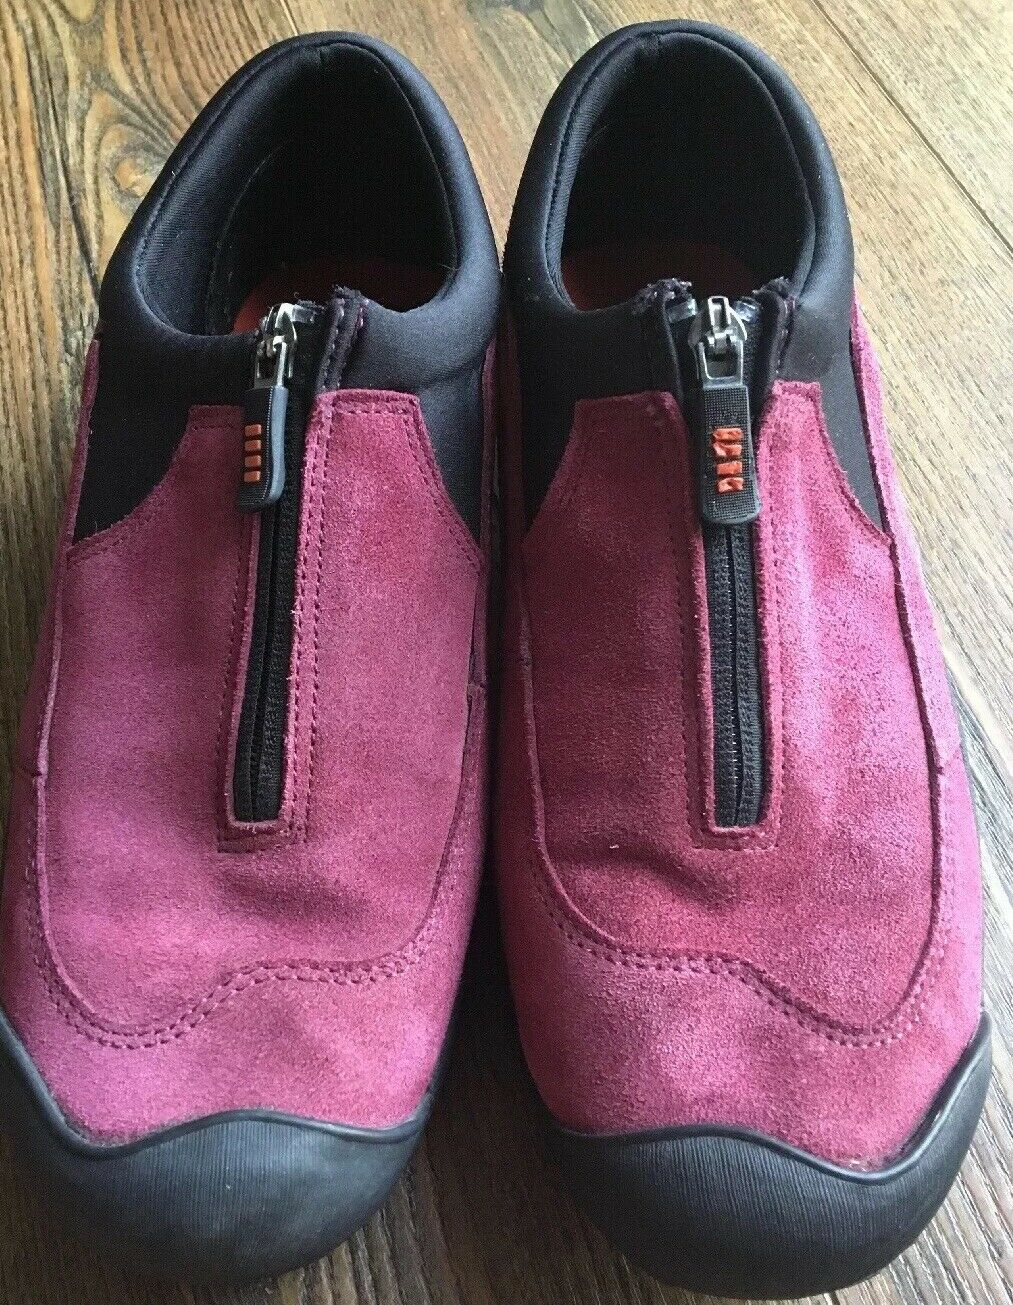 Lands End Womens #322424 Maroon Shoes Loafers 9 B with Zipper Comfort Walking